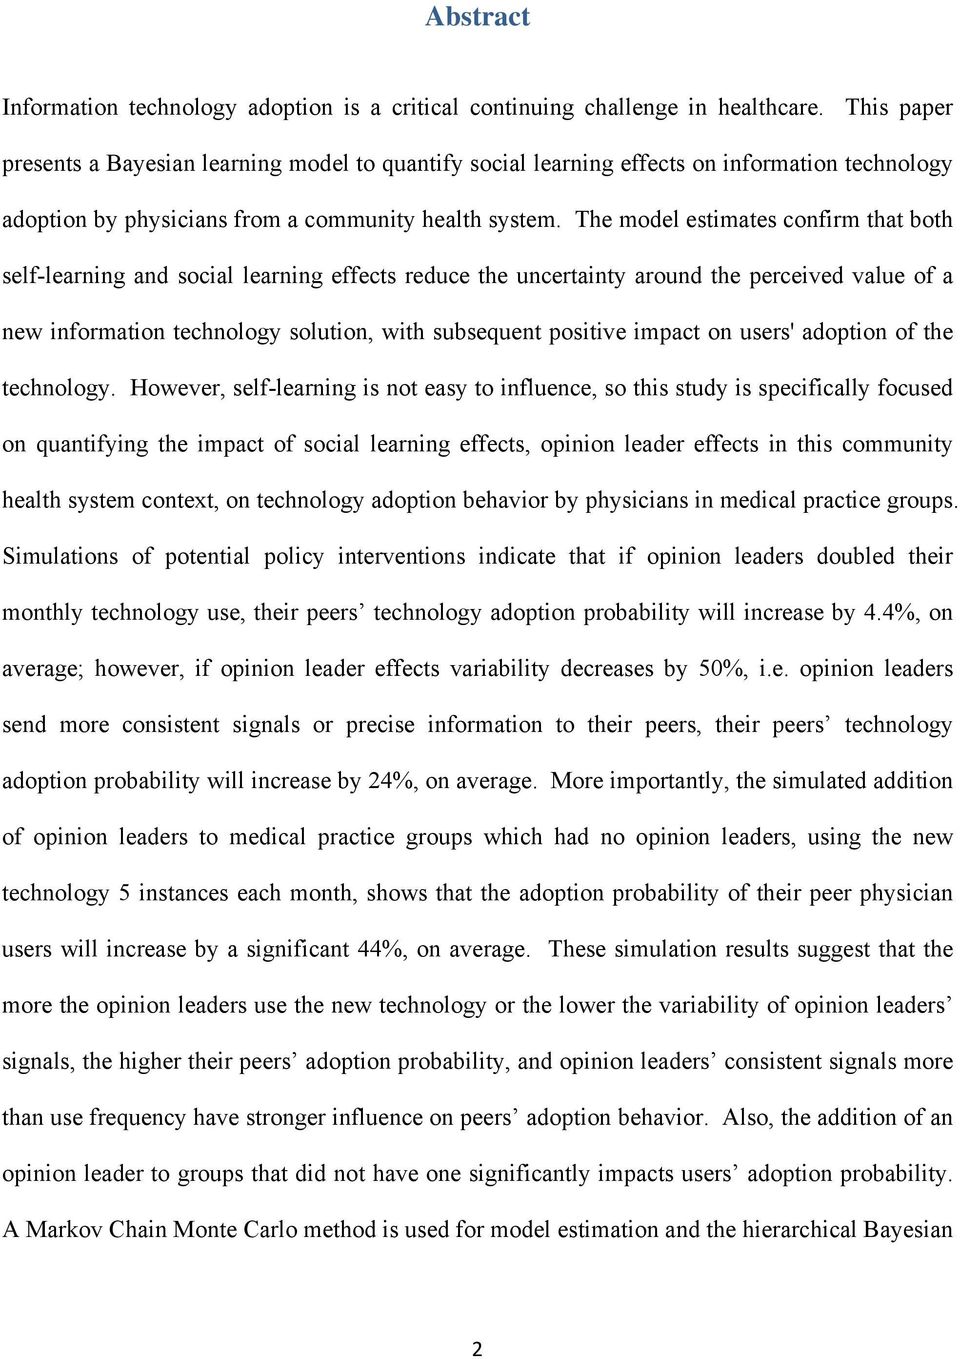 The model estimates confirm that both self-learning and social learning effects reduce the uncertainty around the perceived value of a new information technology solution, with subsequent positive